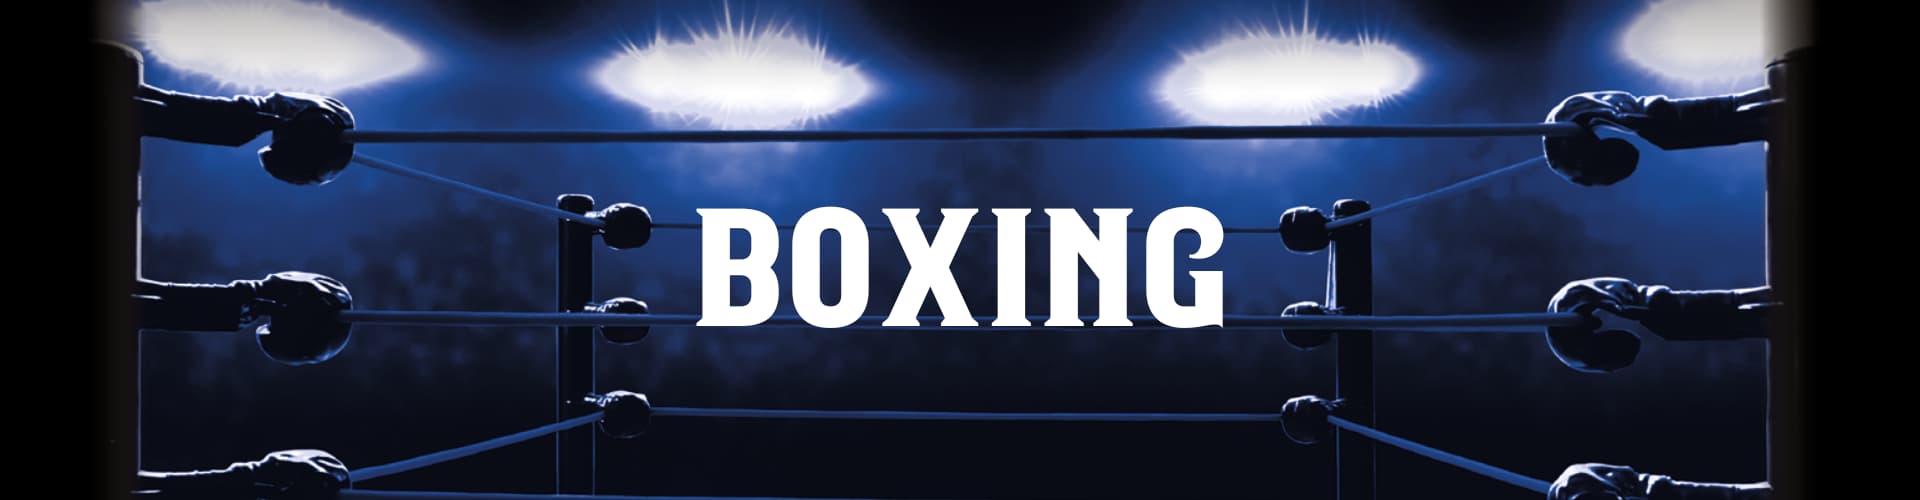 Watch Live Boxing in Leeds at The Midland Hotel Pub